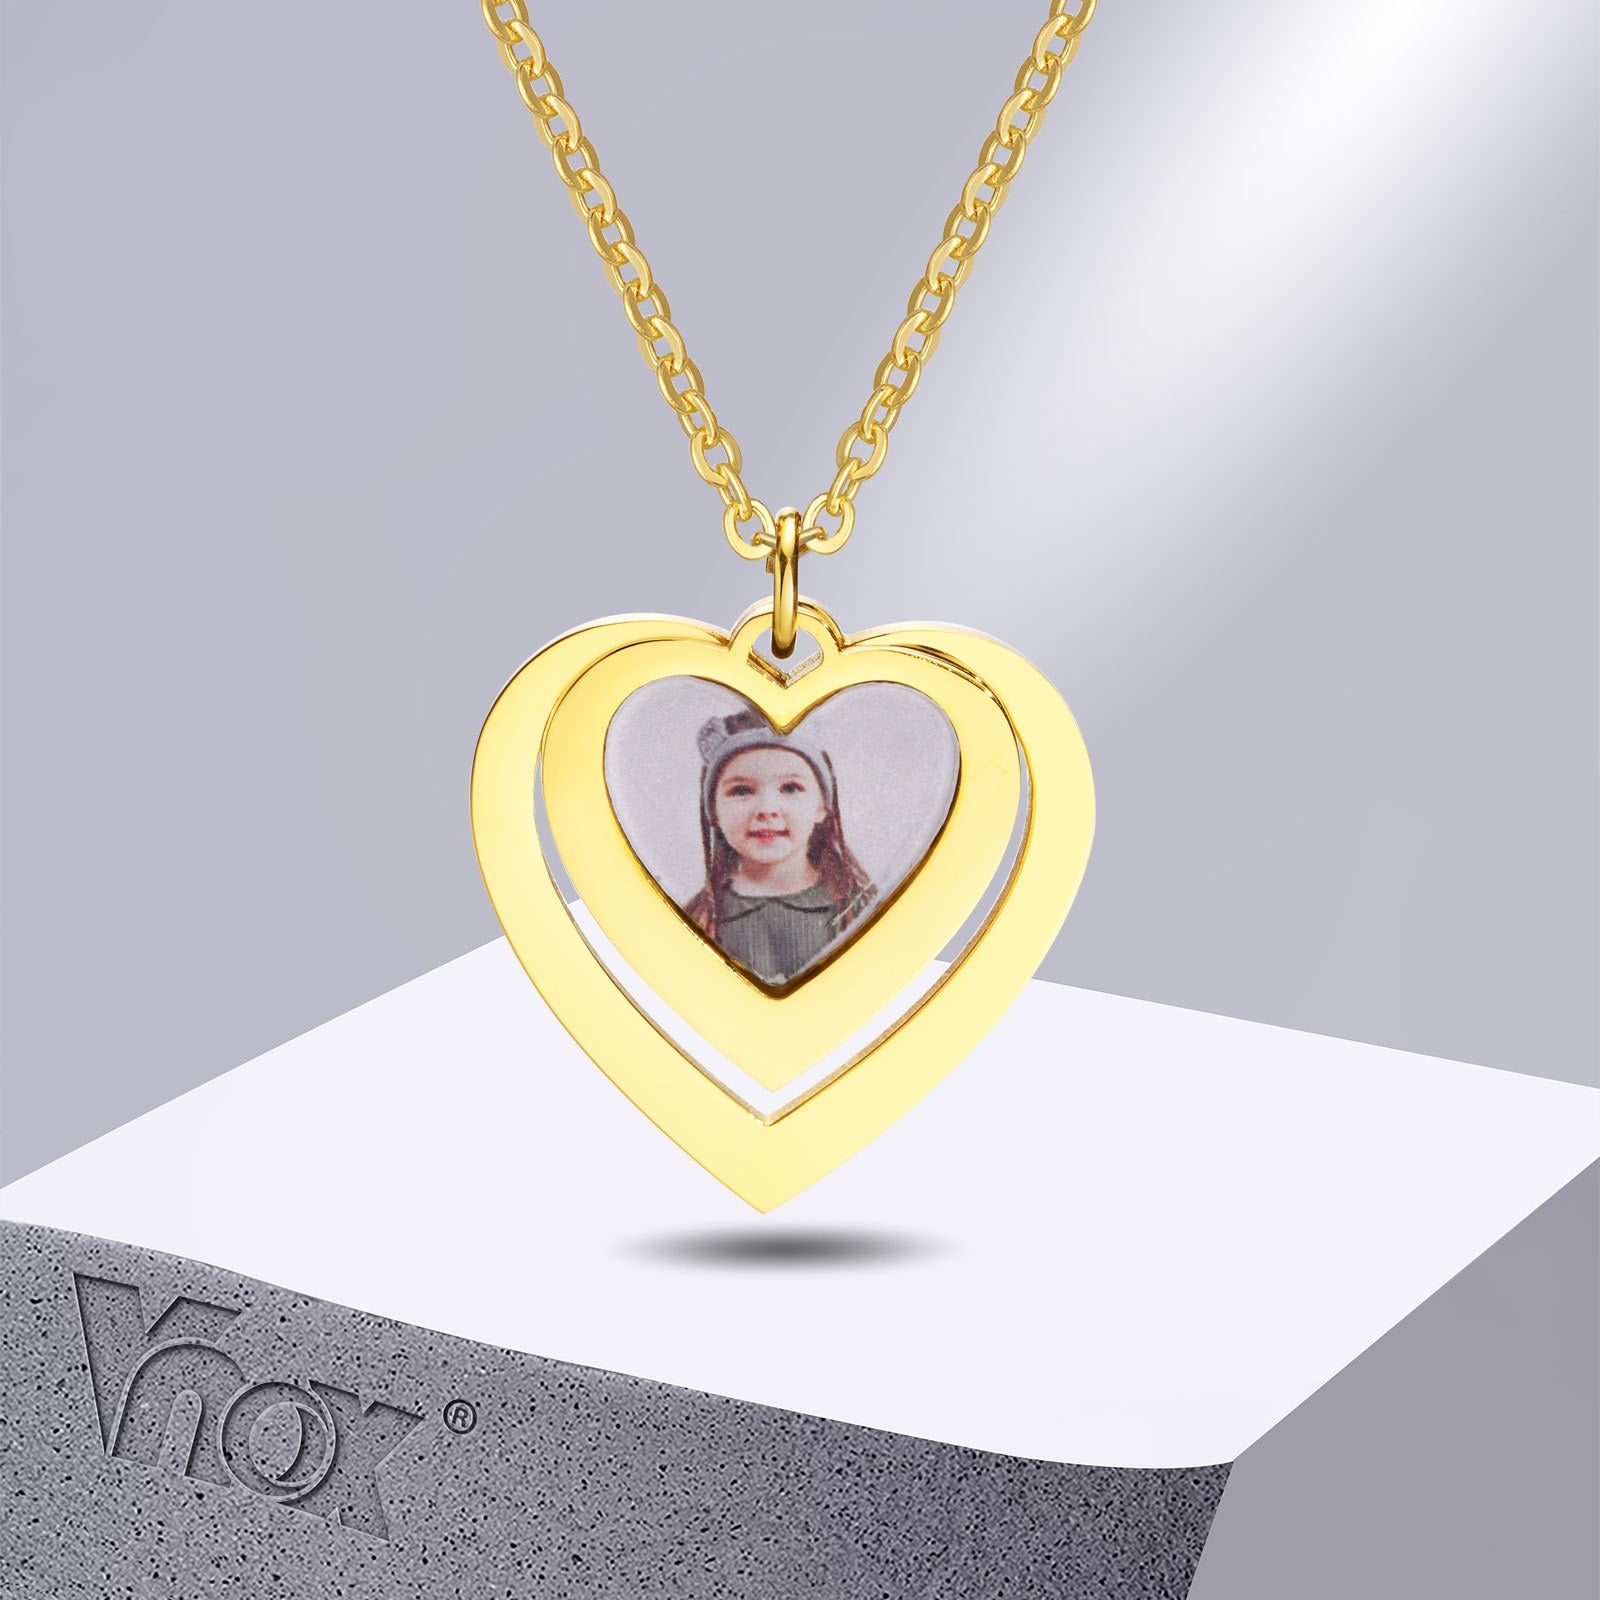 Vnox Free Personalize Photo Picture Necklaces for Women,Stainless Steel Heart Waterdrop Pendant Collar,Custom Engrave Gift - Charlie Dolly